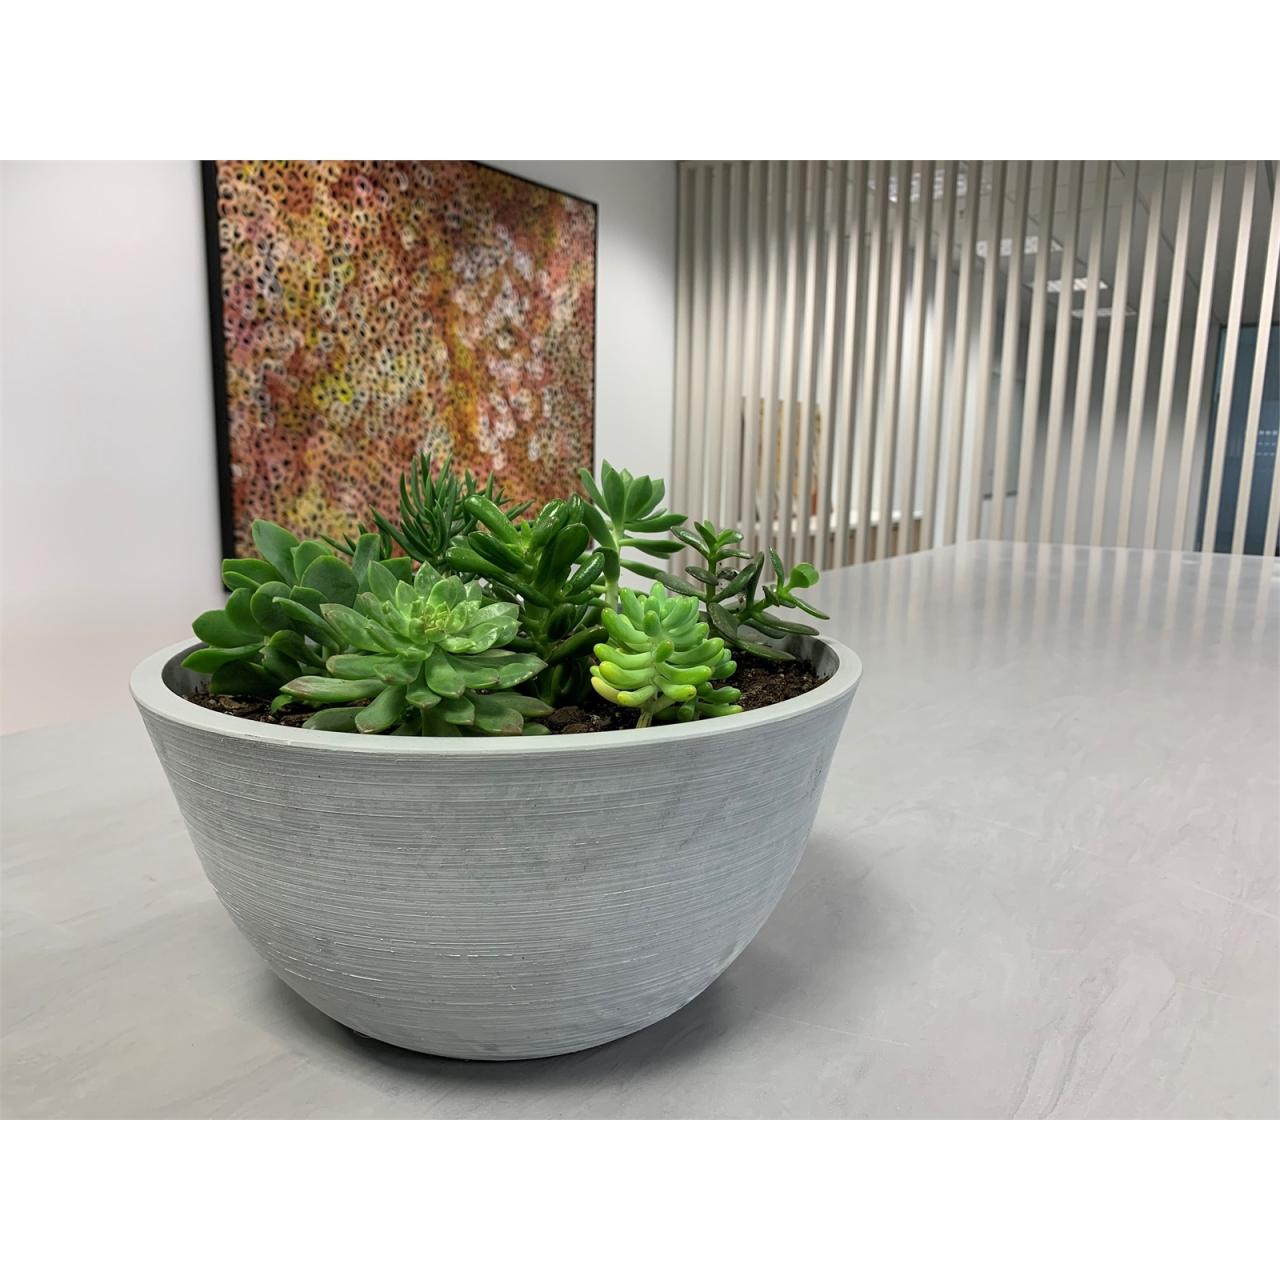 Hanging Plants Indoor | Bunnings Bowl Planter: Stylish Designs, Plant Selection, and DIY Projects